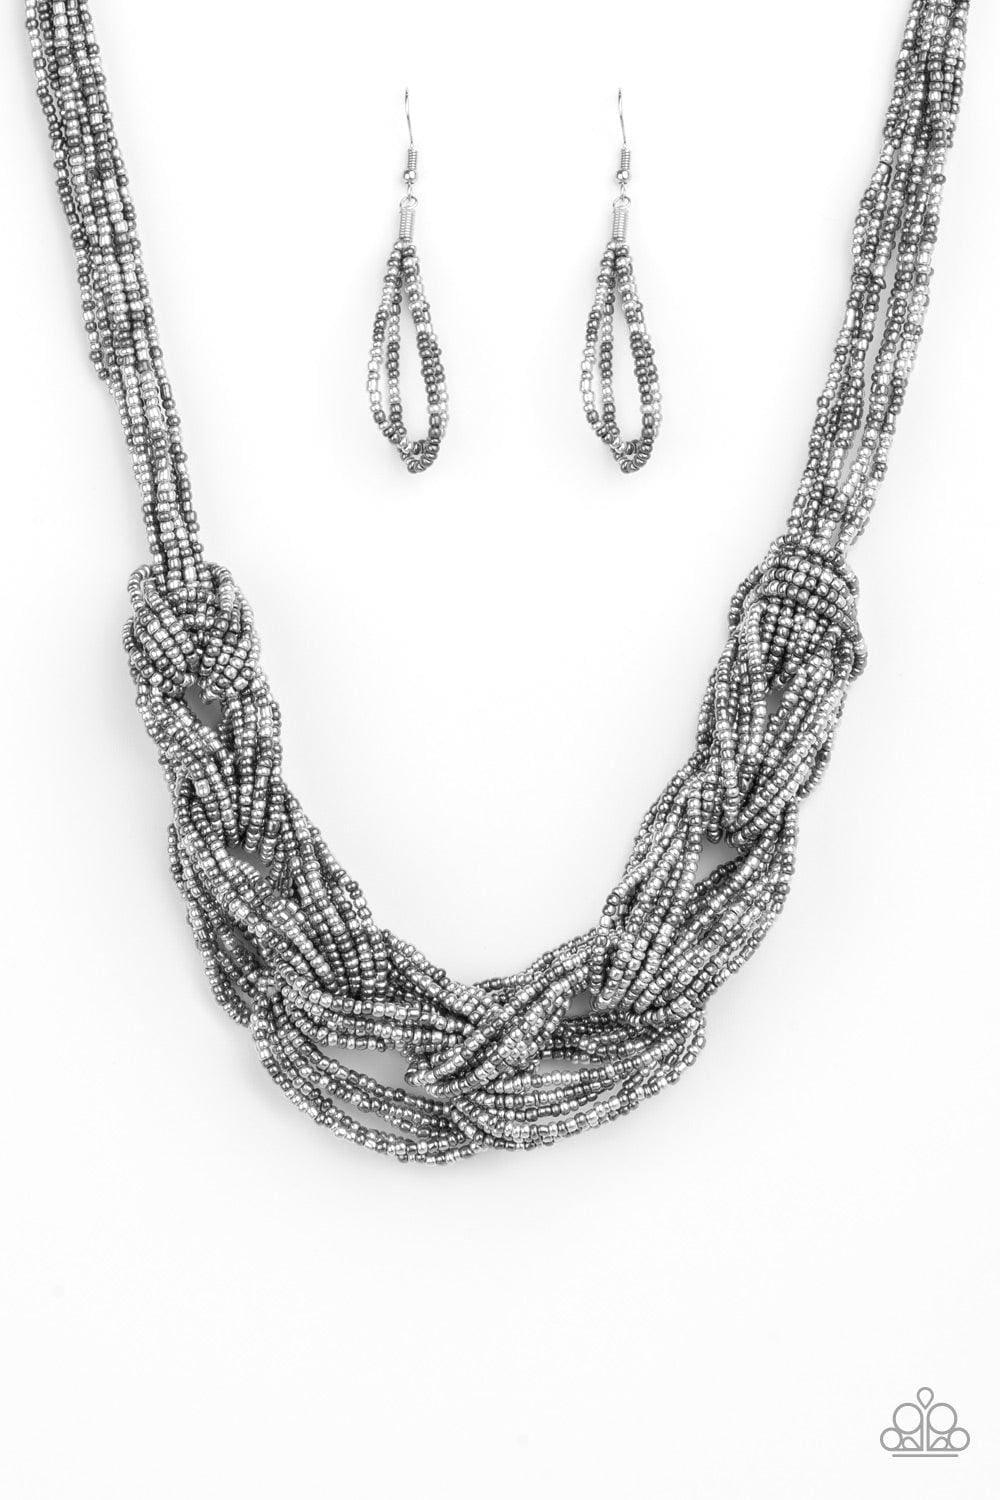 Paparazzi Accessories - City Catwalk - Silver Necklace - Bling by JessieK